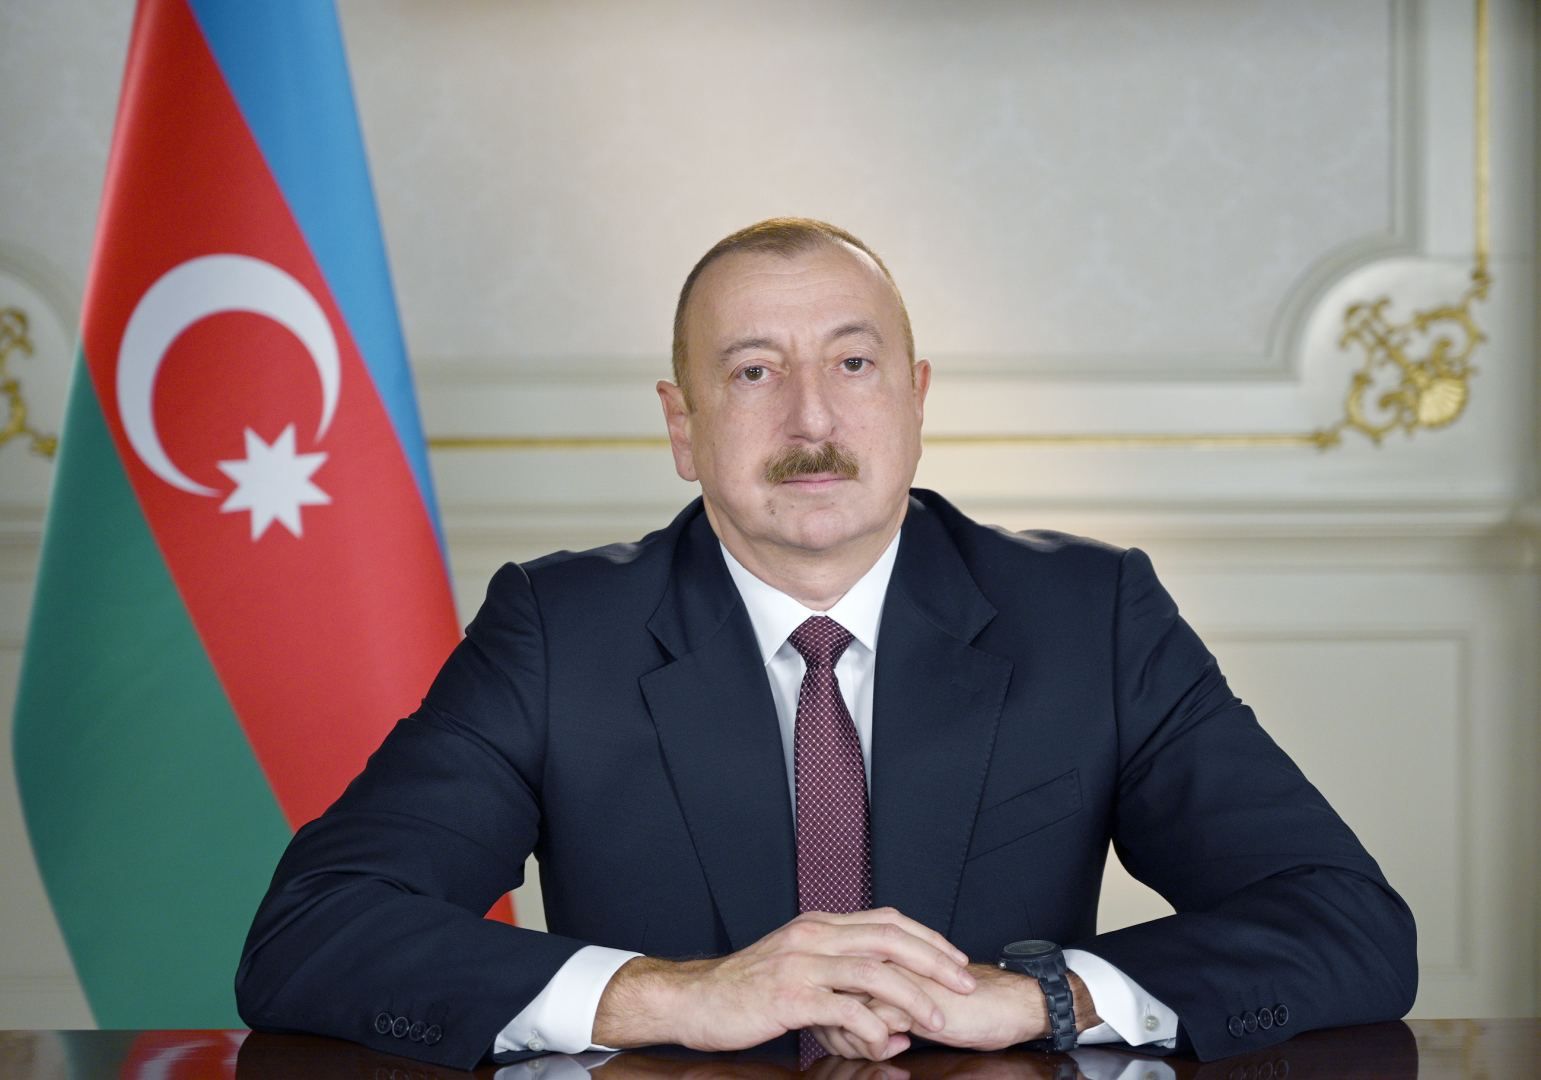 Chairman of 75th session of UN General Assembly sends congratulatory letter to President Ilham Aliyev